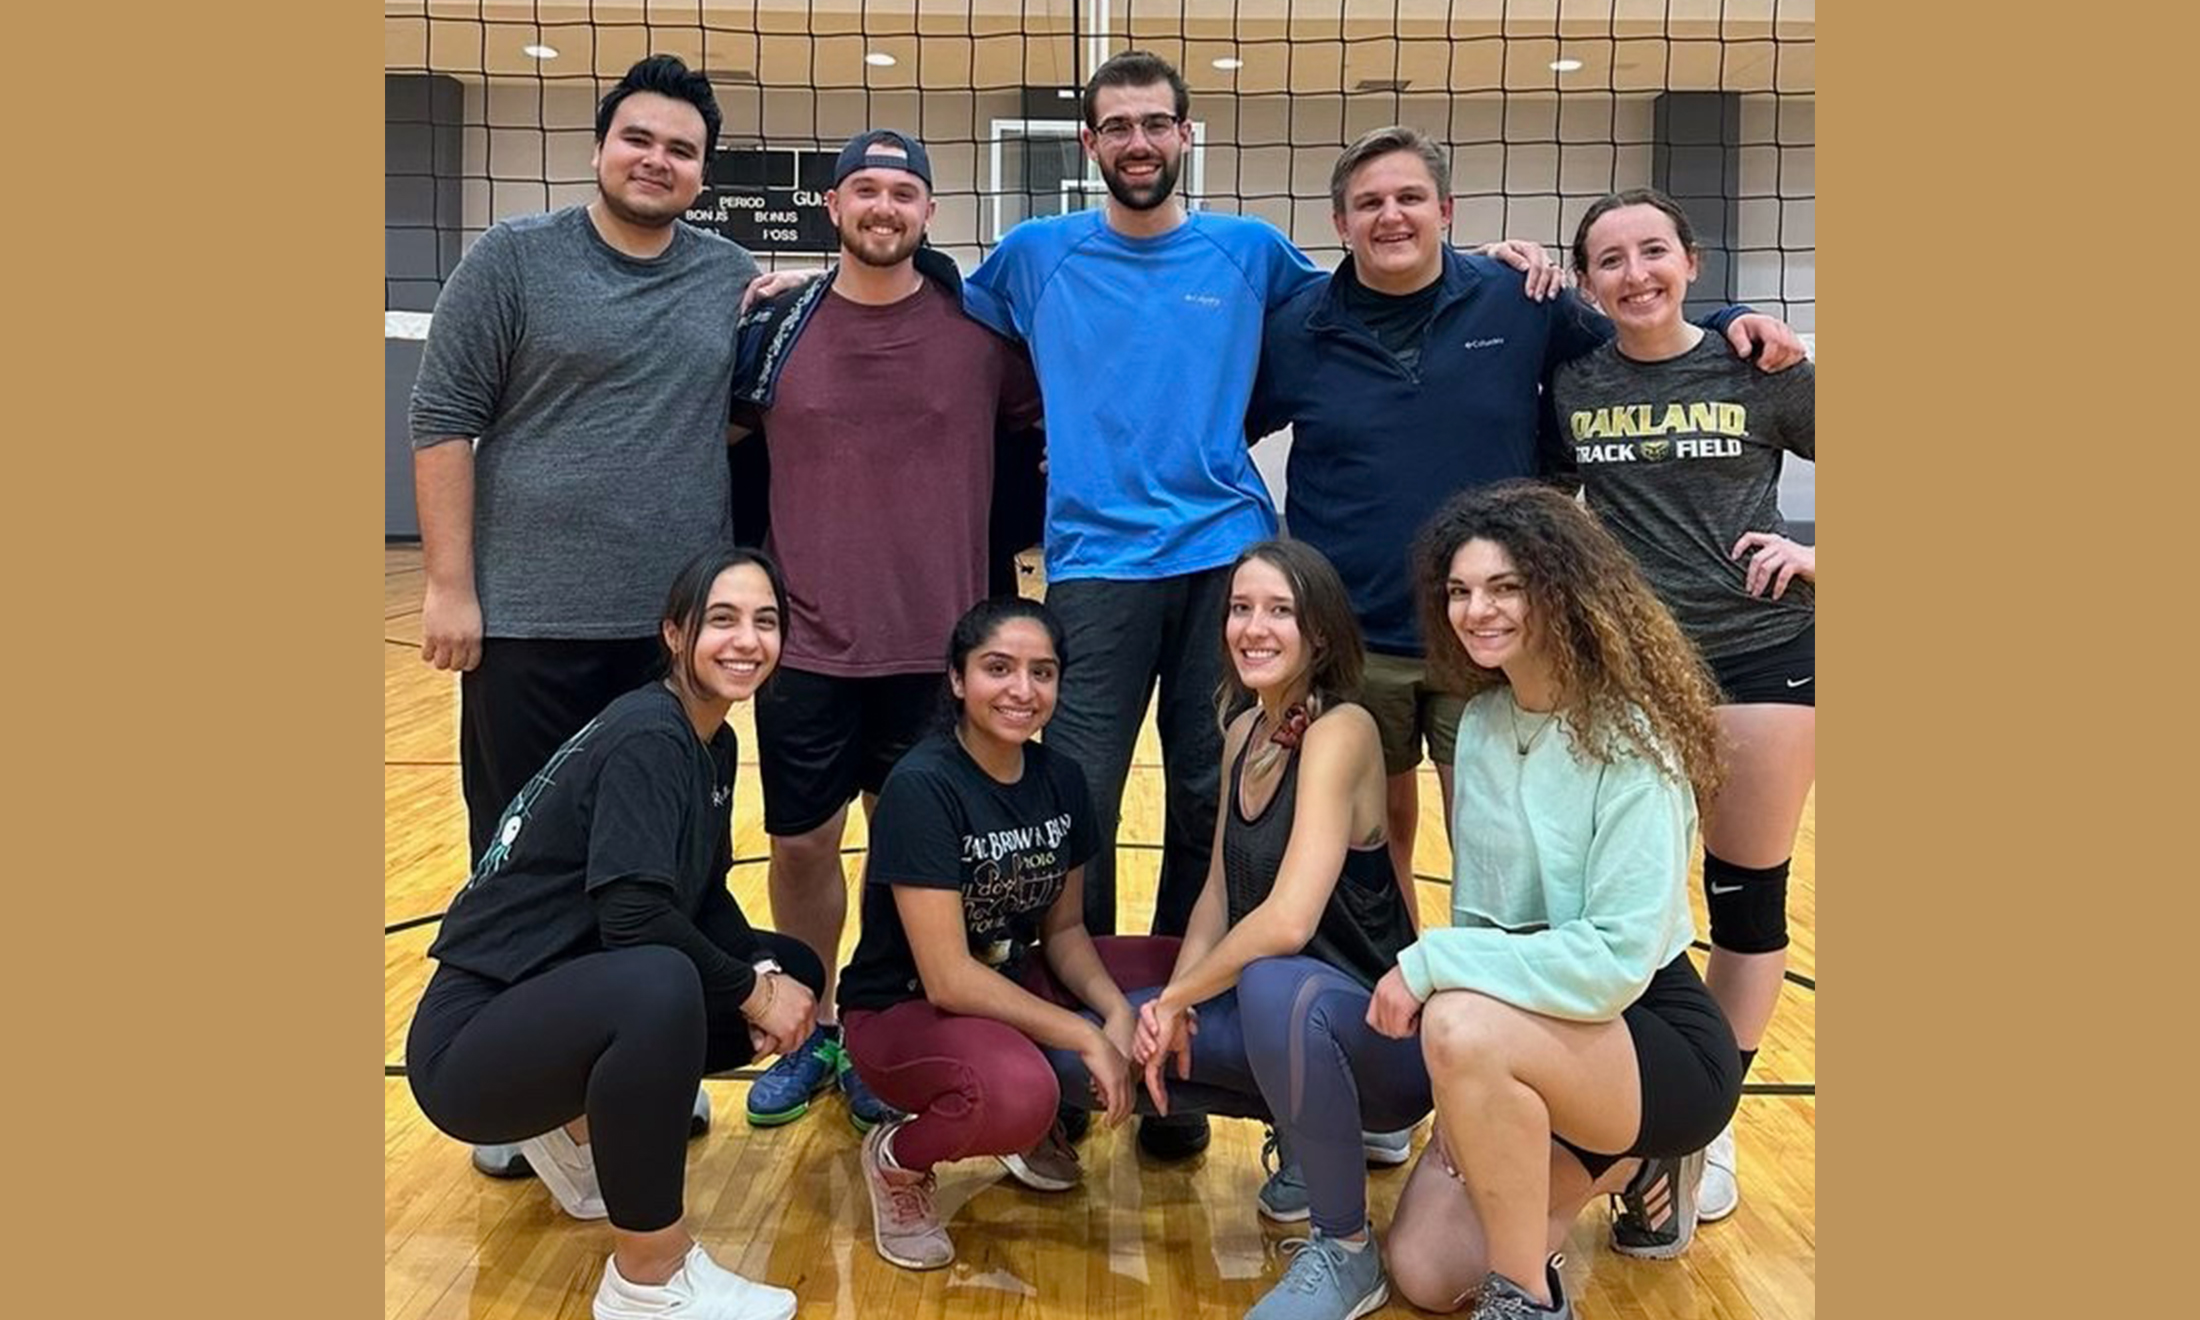 Students Find Passion Through Intramural Sports Program